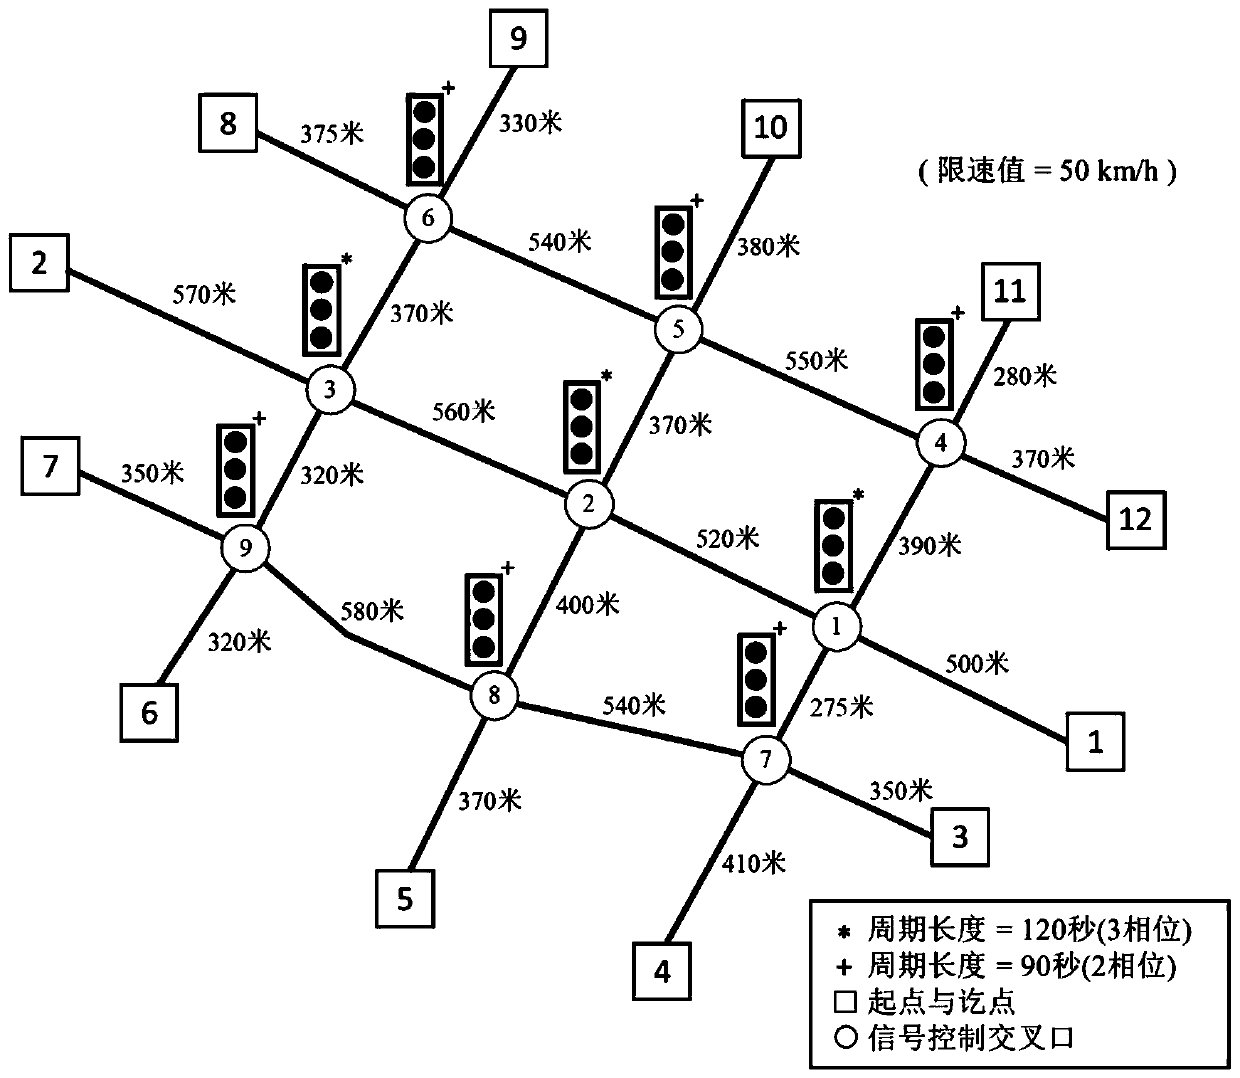 A method for estimating vehicle od in road network based on sampled trajectory data